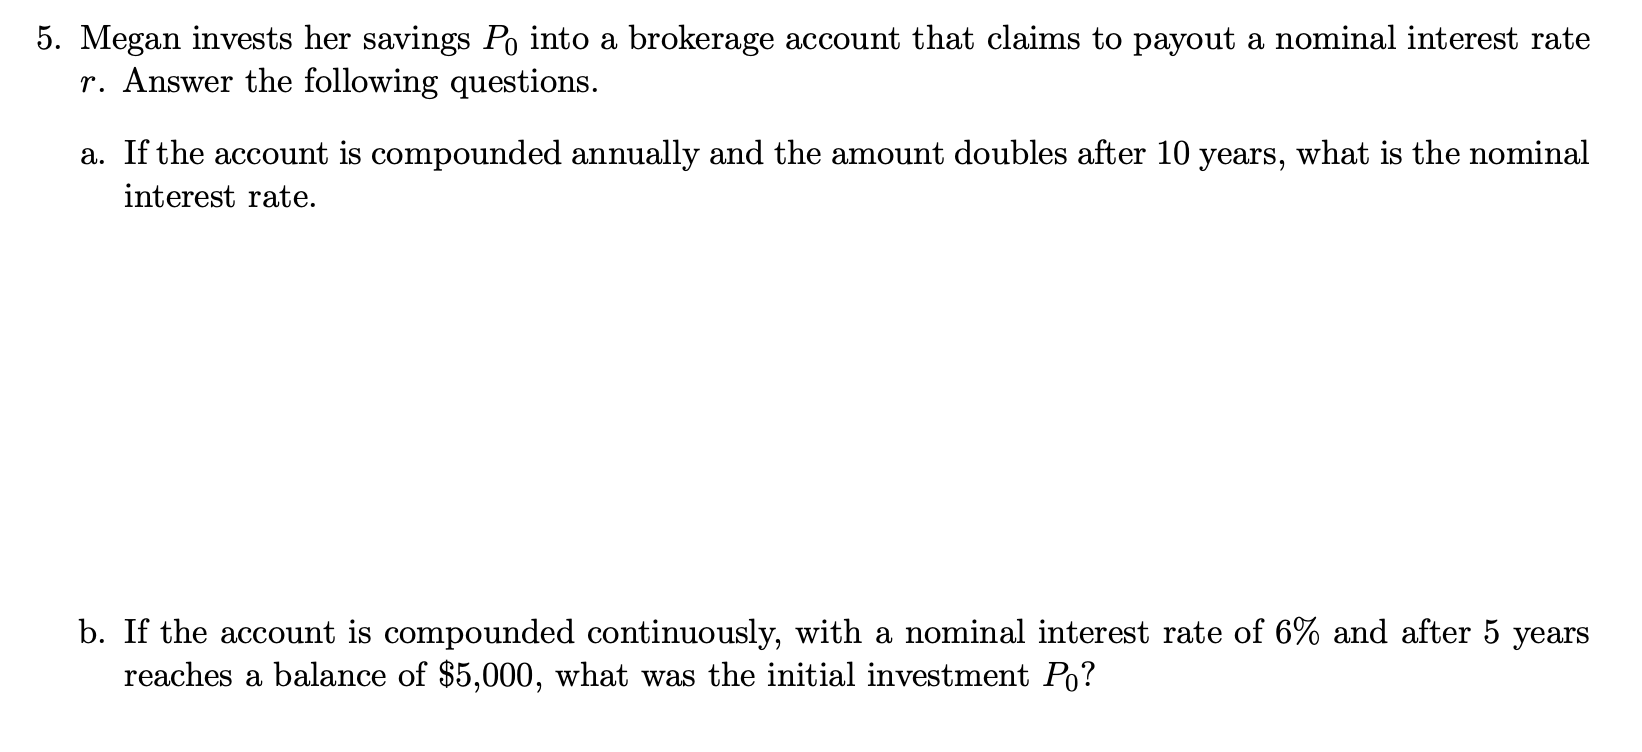 5. Megan invests her savings Po into a brokerage account that claims to payout a nominal interest rate
r. Answer the following questions.
a. If the account is compounded annually and the amount doubles after 10 years, what is the nominal
interest rate.
b. If the account is compounded continuously, with a nominal interest rate of 6% and after 5 years
reaches a balance of $5,000, what was the initial investment Po?
